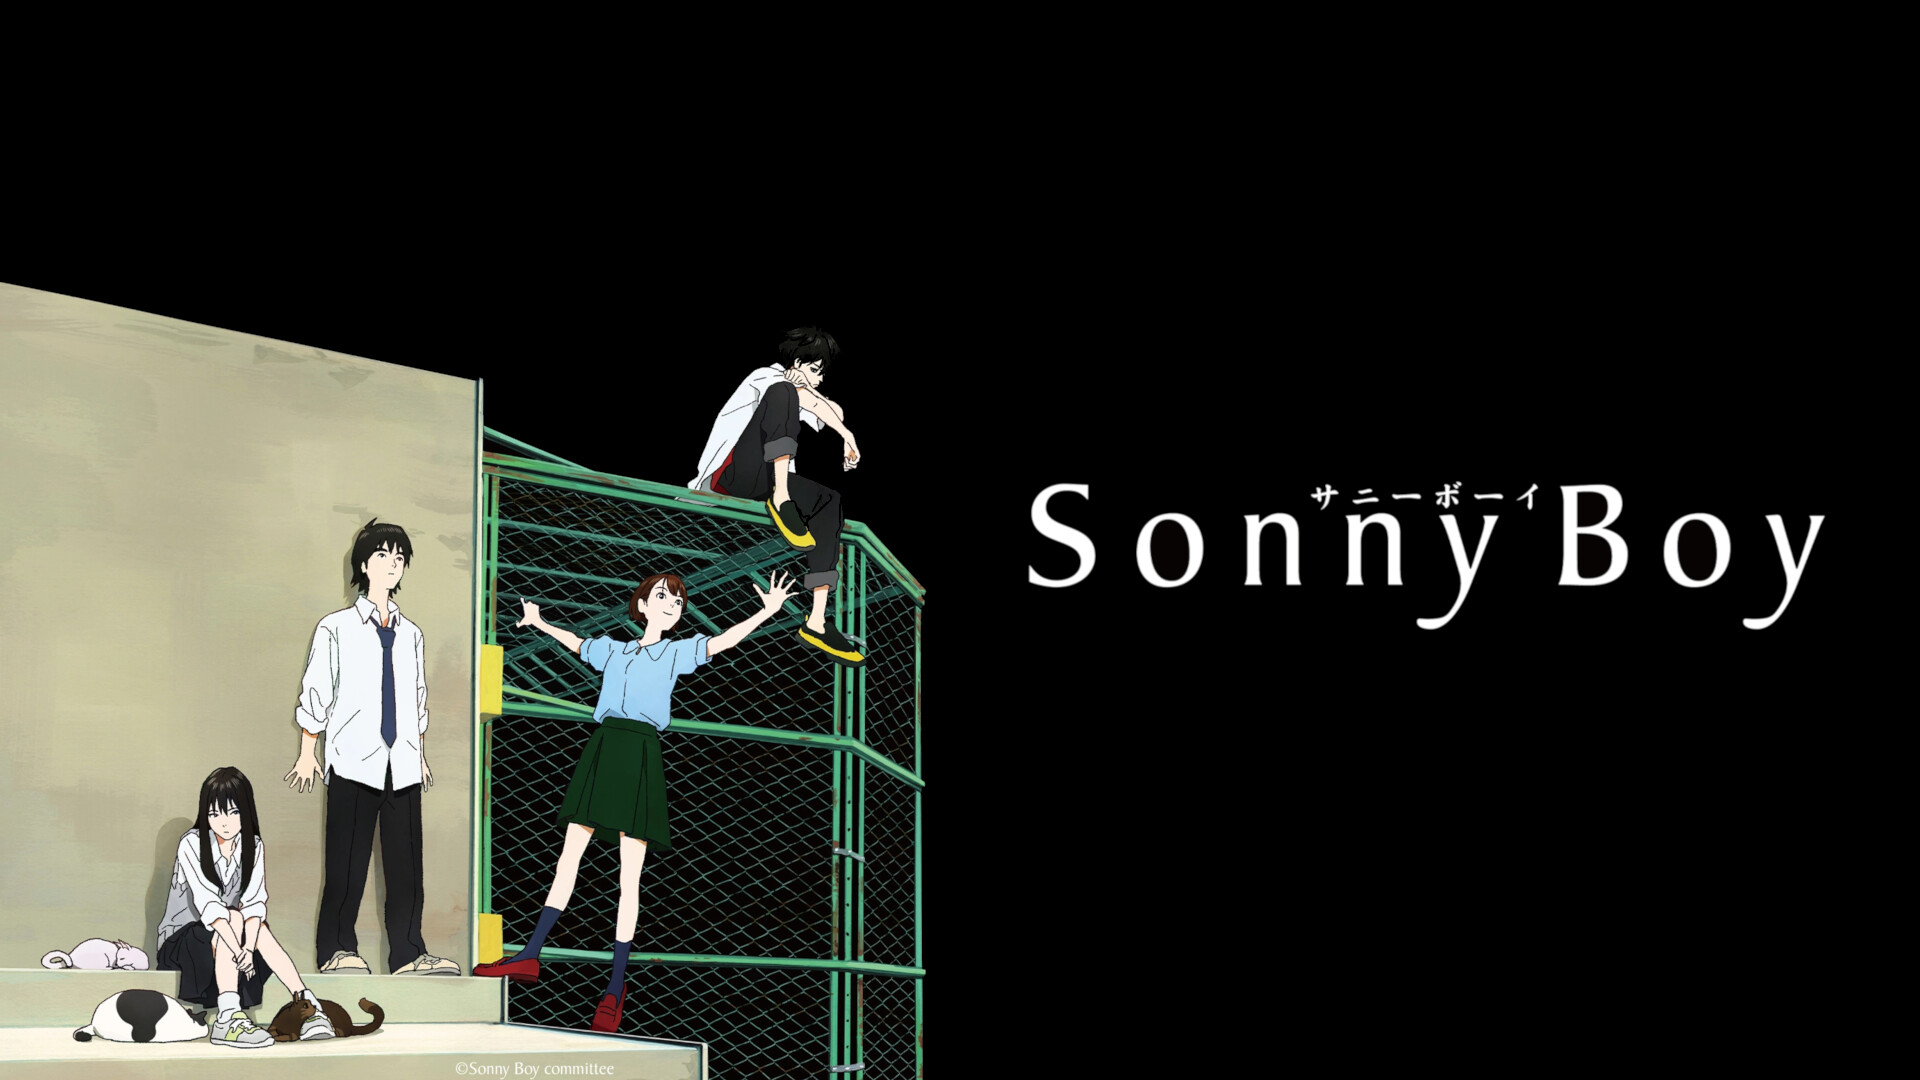 Sonny Boy: Anime, Based on an original story written by director Shingo Natsume. 1920x1080 Full HD Background.